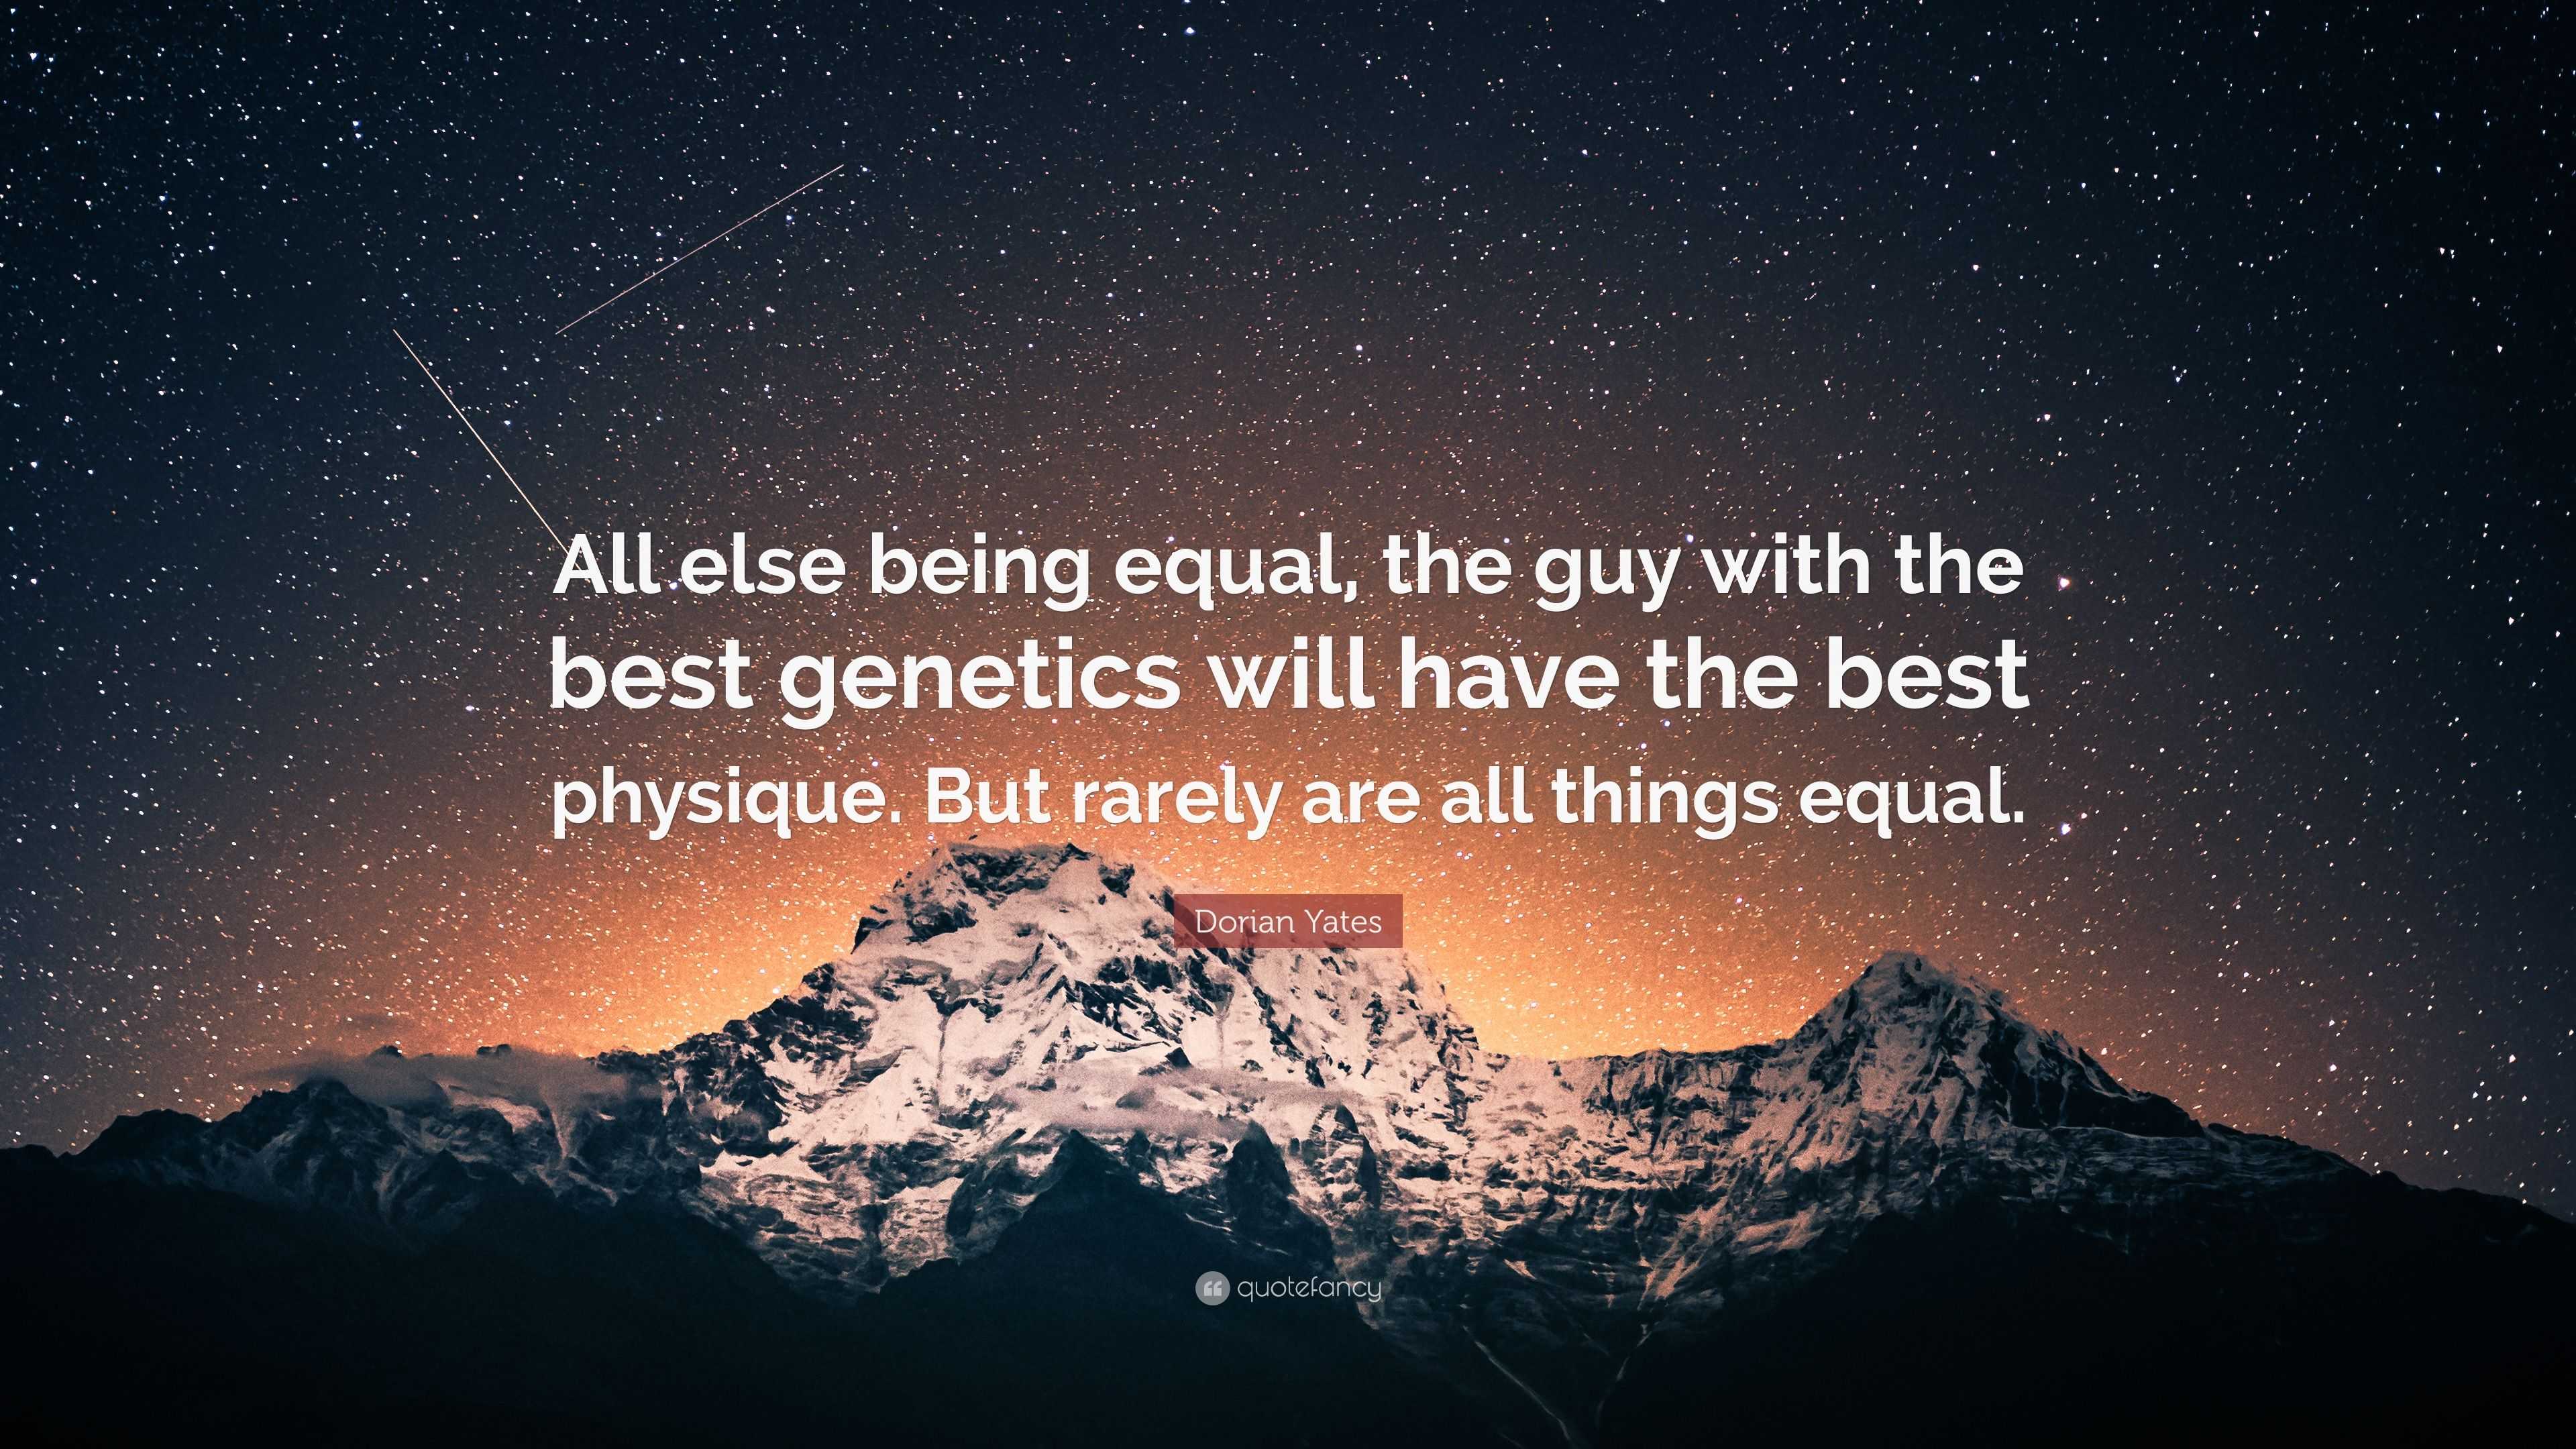 Dorian Yates Quote: “All else equal, the guy with the best genetics will have the